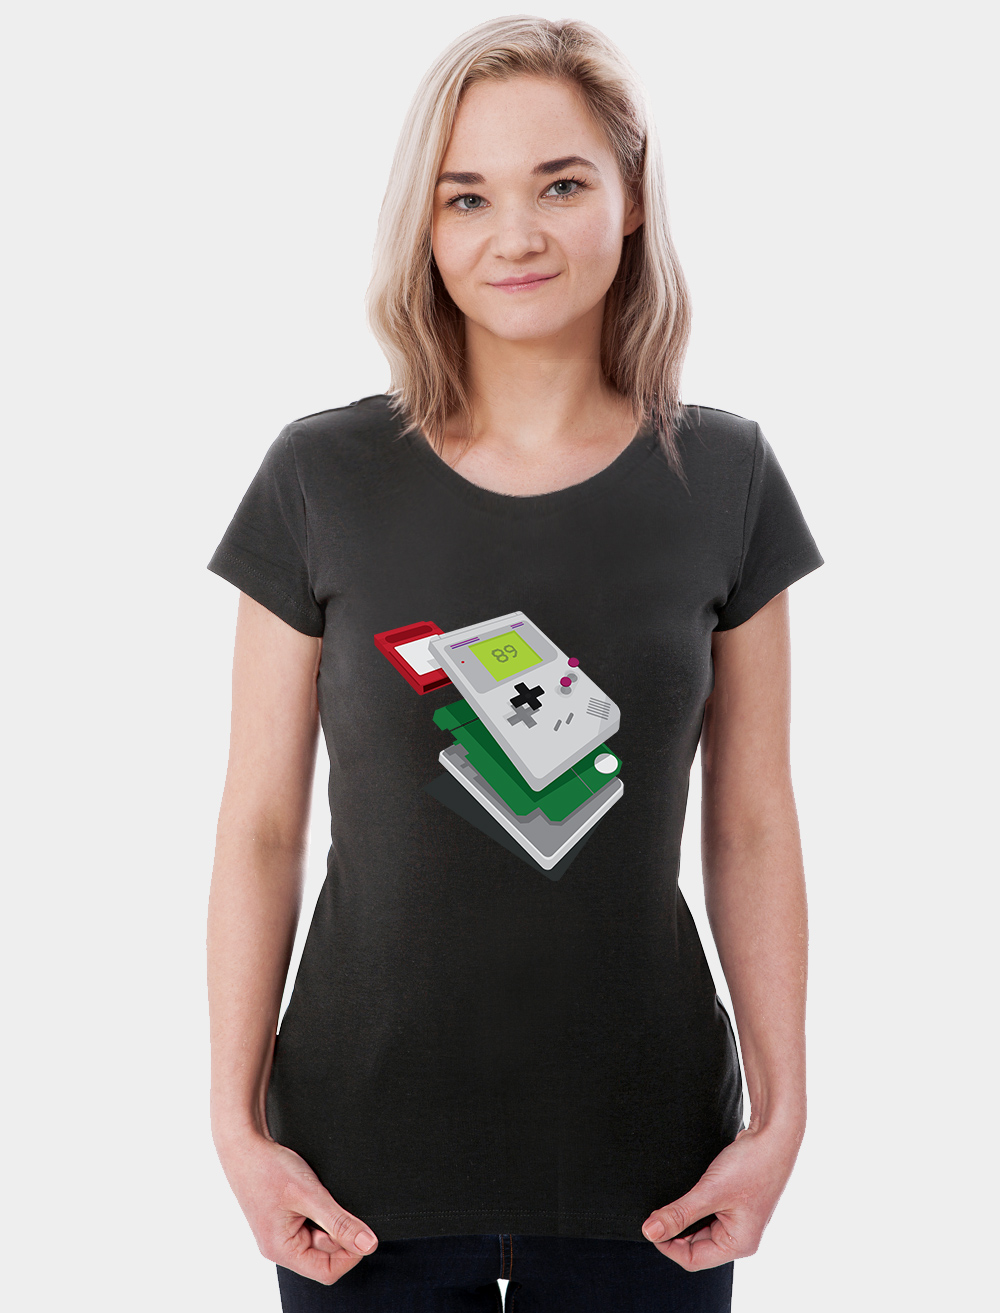 product-gameboy-deconstructed-tshirt-model1